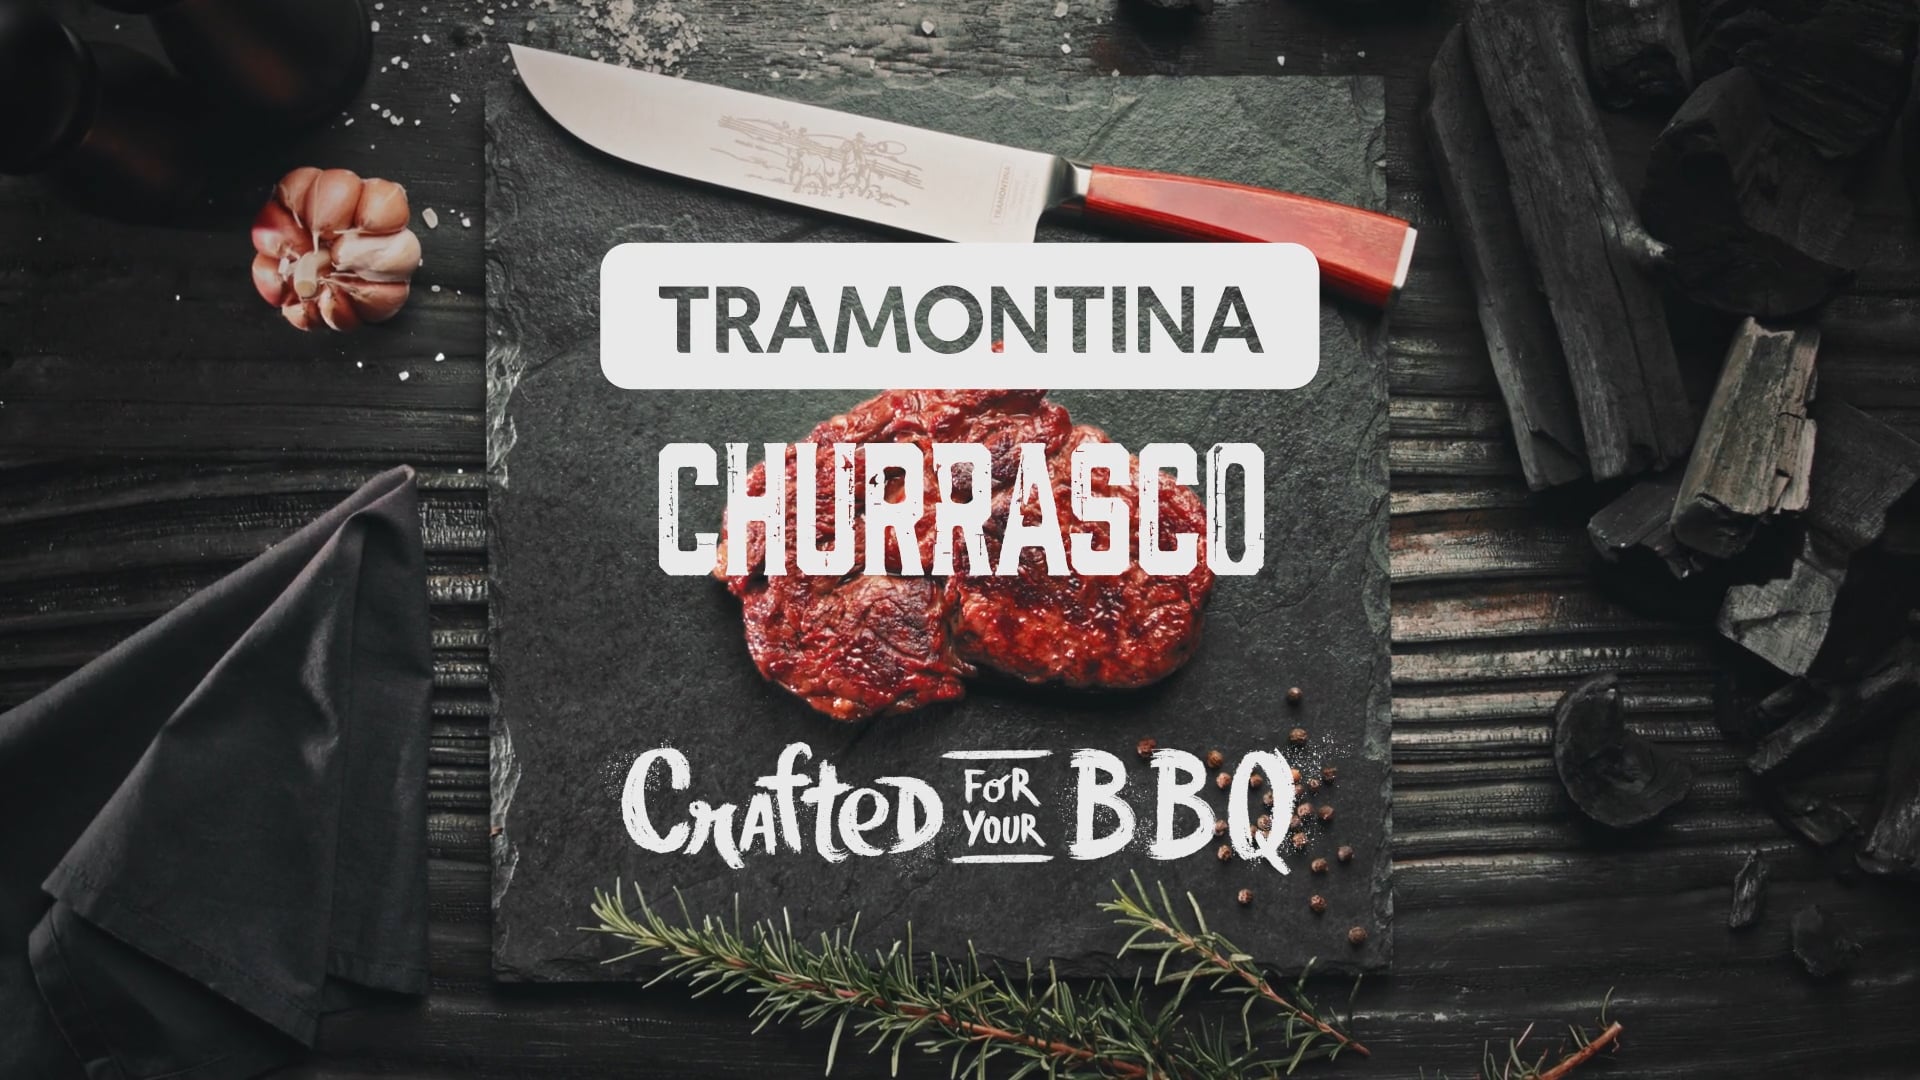 TRAMONTINA Churrasco · Crafted for your BBQ · USA